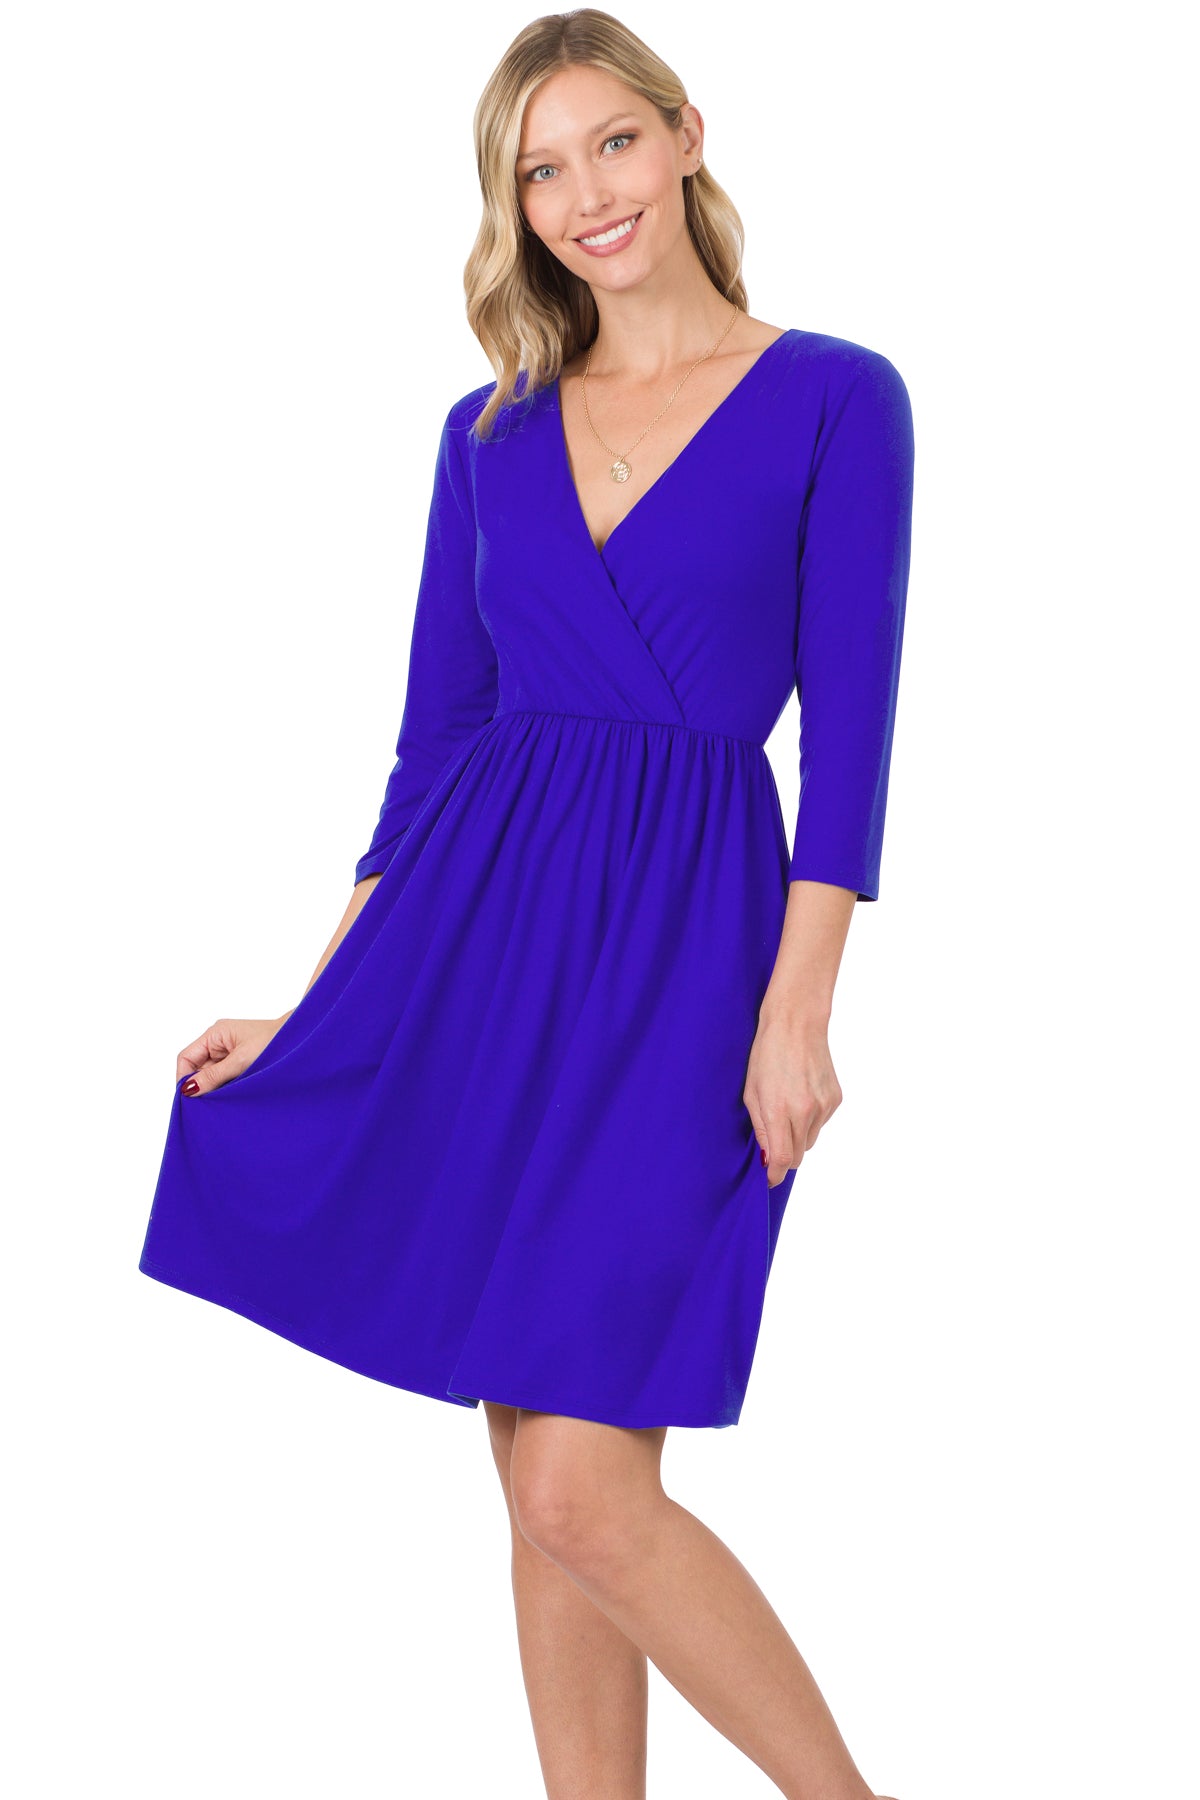 S & XL ONLY Operation Femme Fatale Dress in Bright Blue